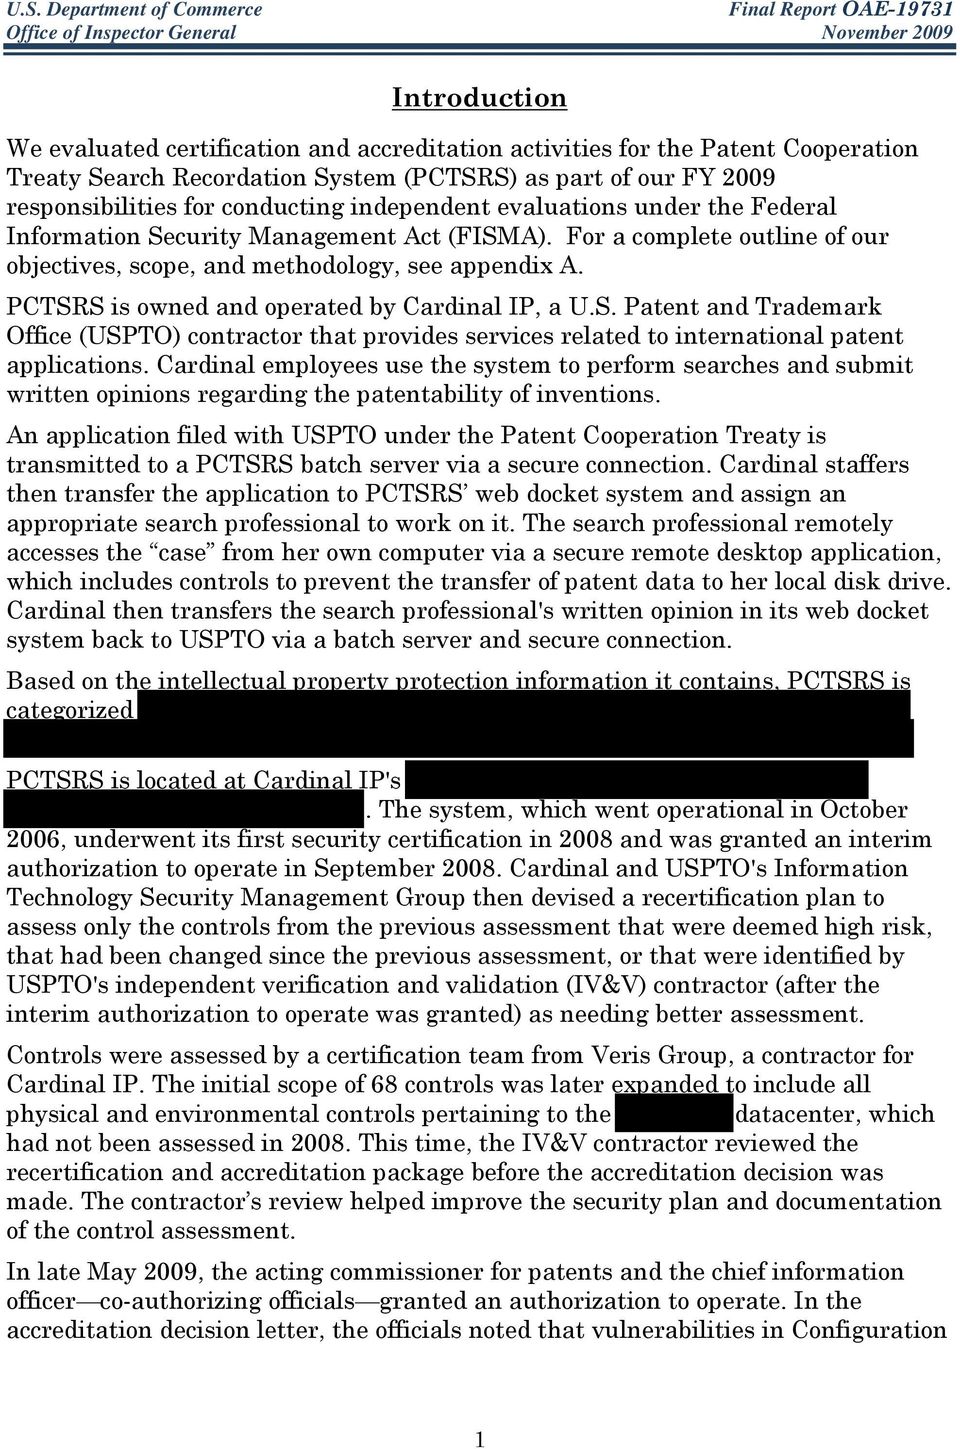 PCTSRS is owned and operated by Cardinal IP, a U.S. Patent and Trademark Office (USPTO) contractor that provides services related to international patent applications.